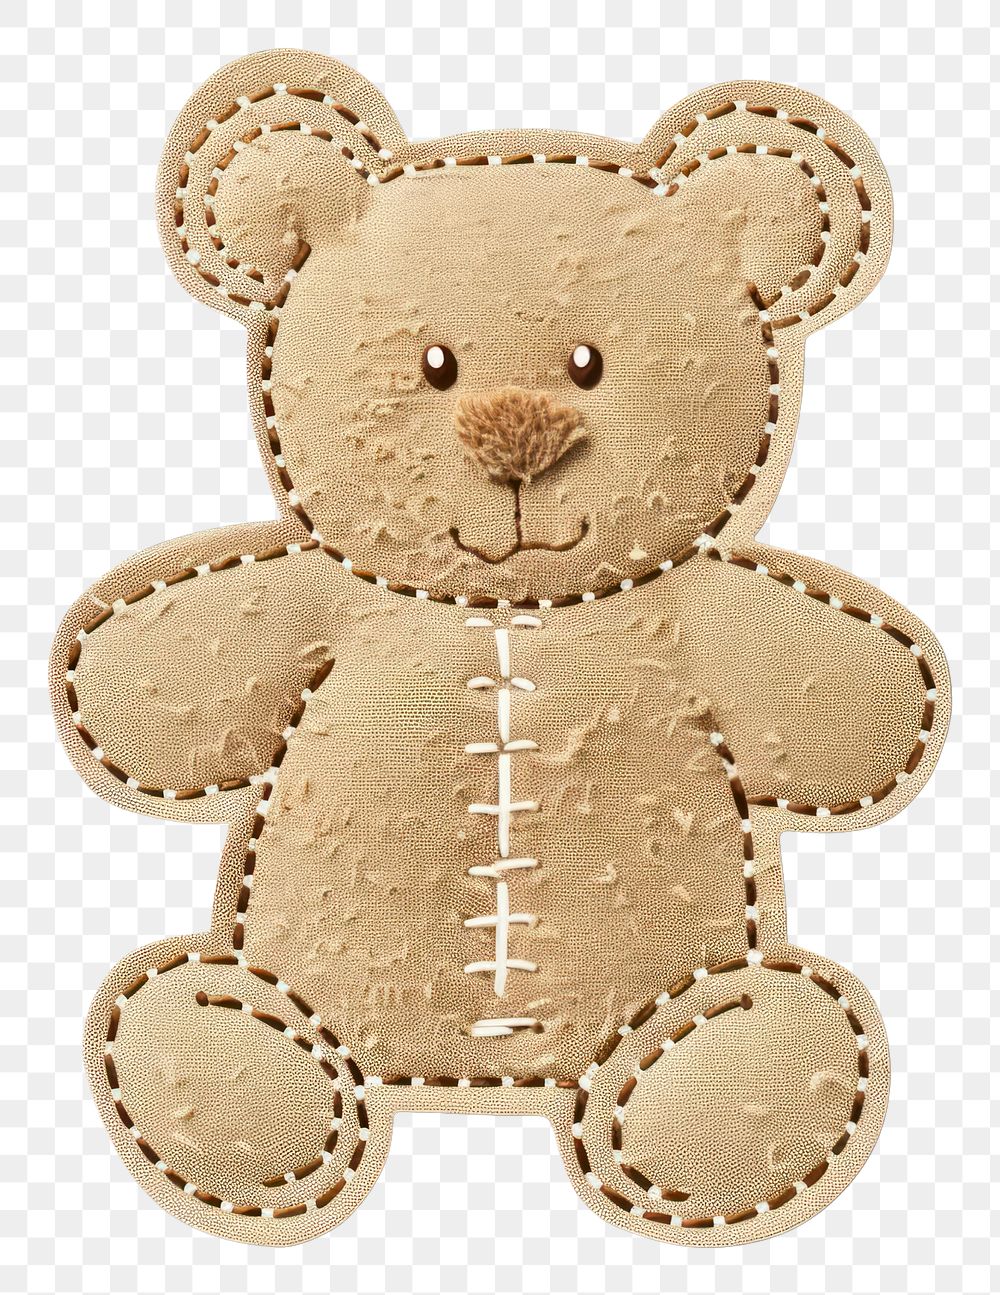 Teddy bear shape ticket confectionery accessories gingerbread.